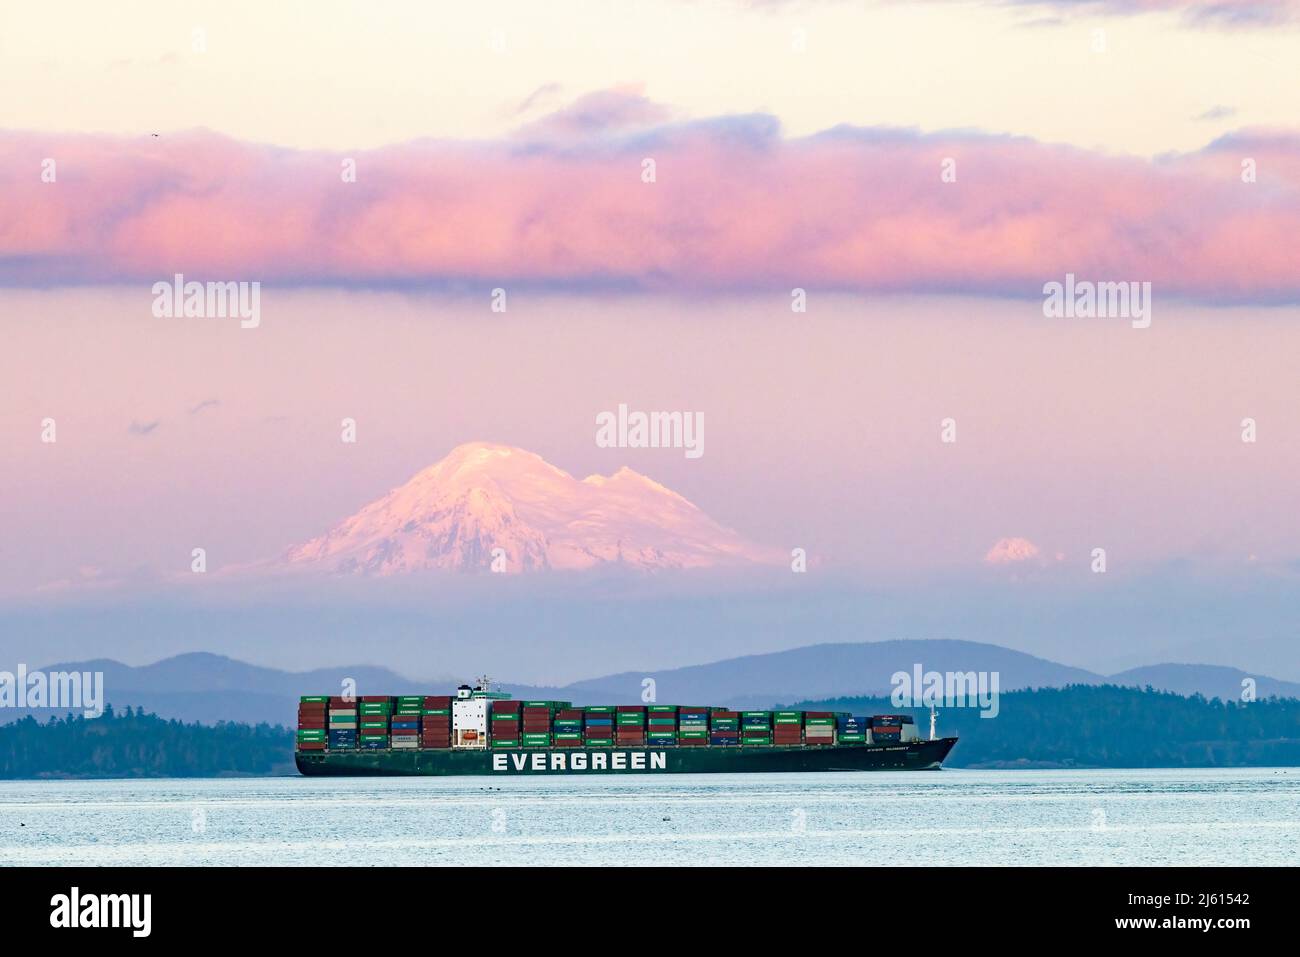 Evergreen container ship in the Haro Strait with Mount Baker in the background. Near Oak Bay, Victoria, Vancouver Island, British Columbia, Canada Stock Photo